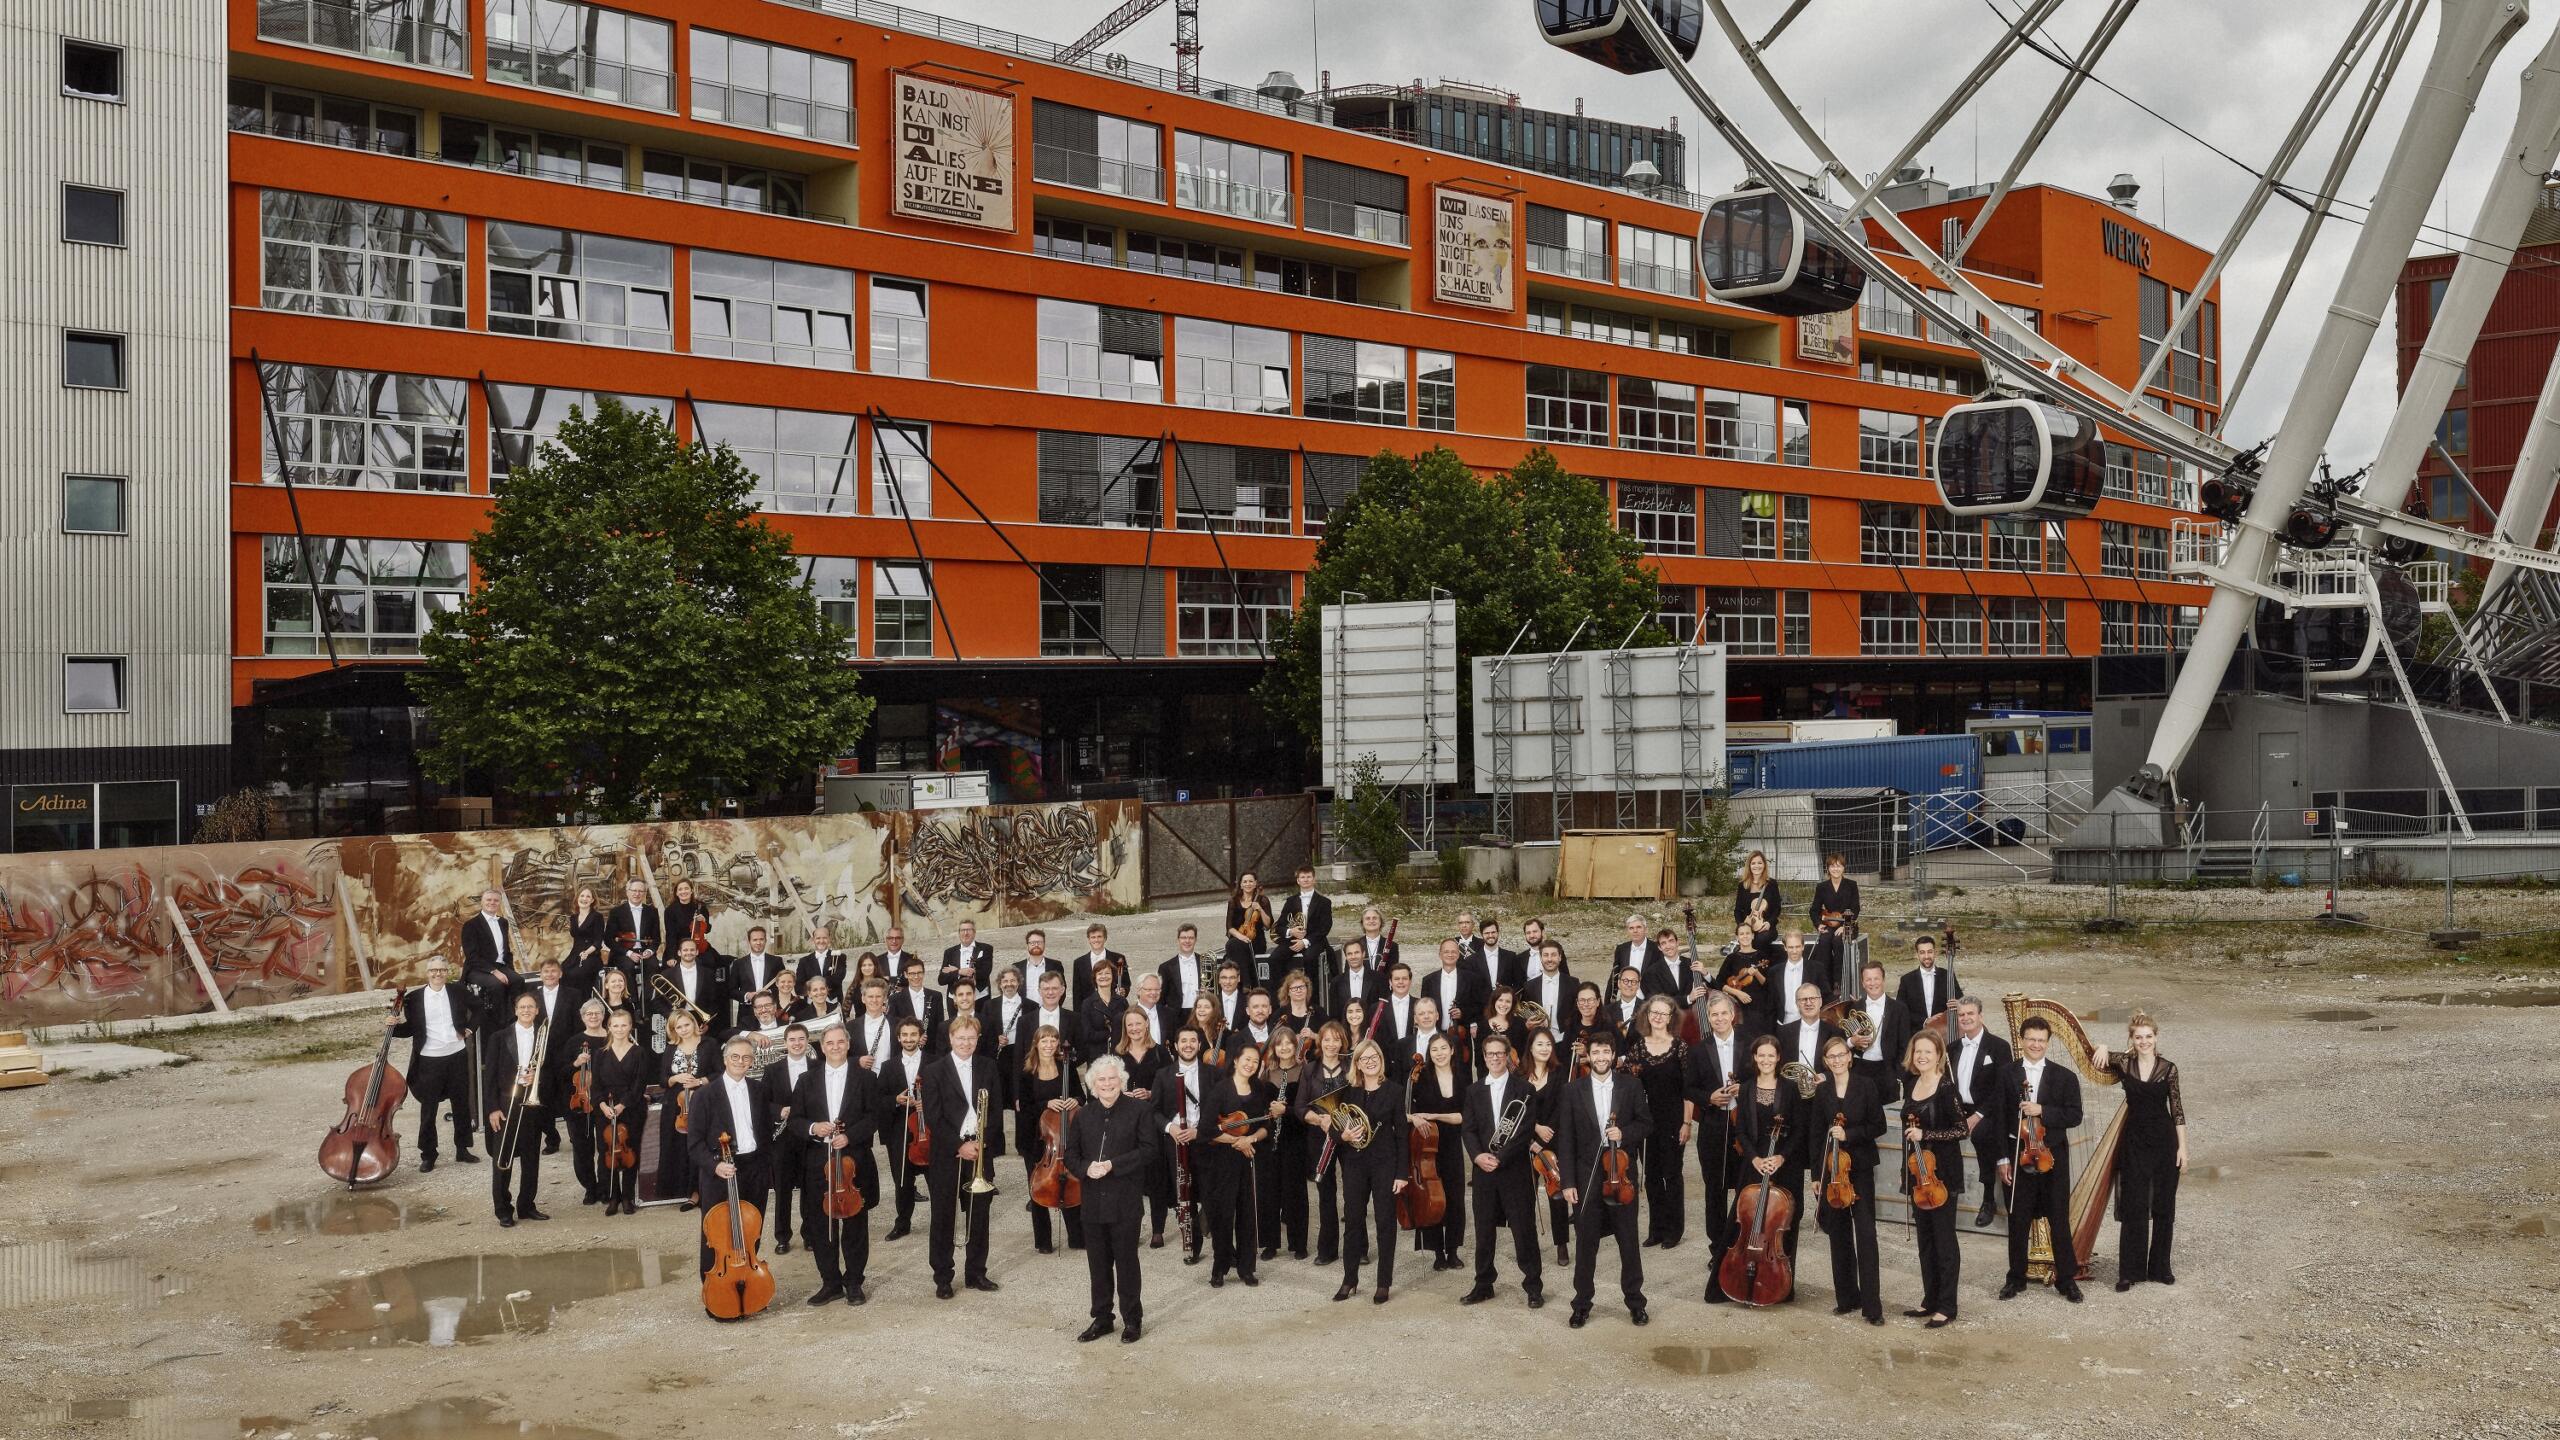 An orchestra stands on a building site